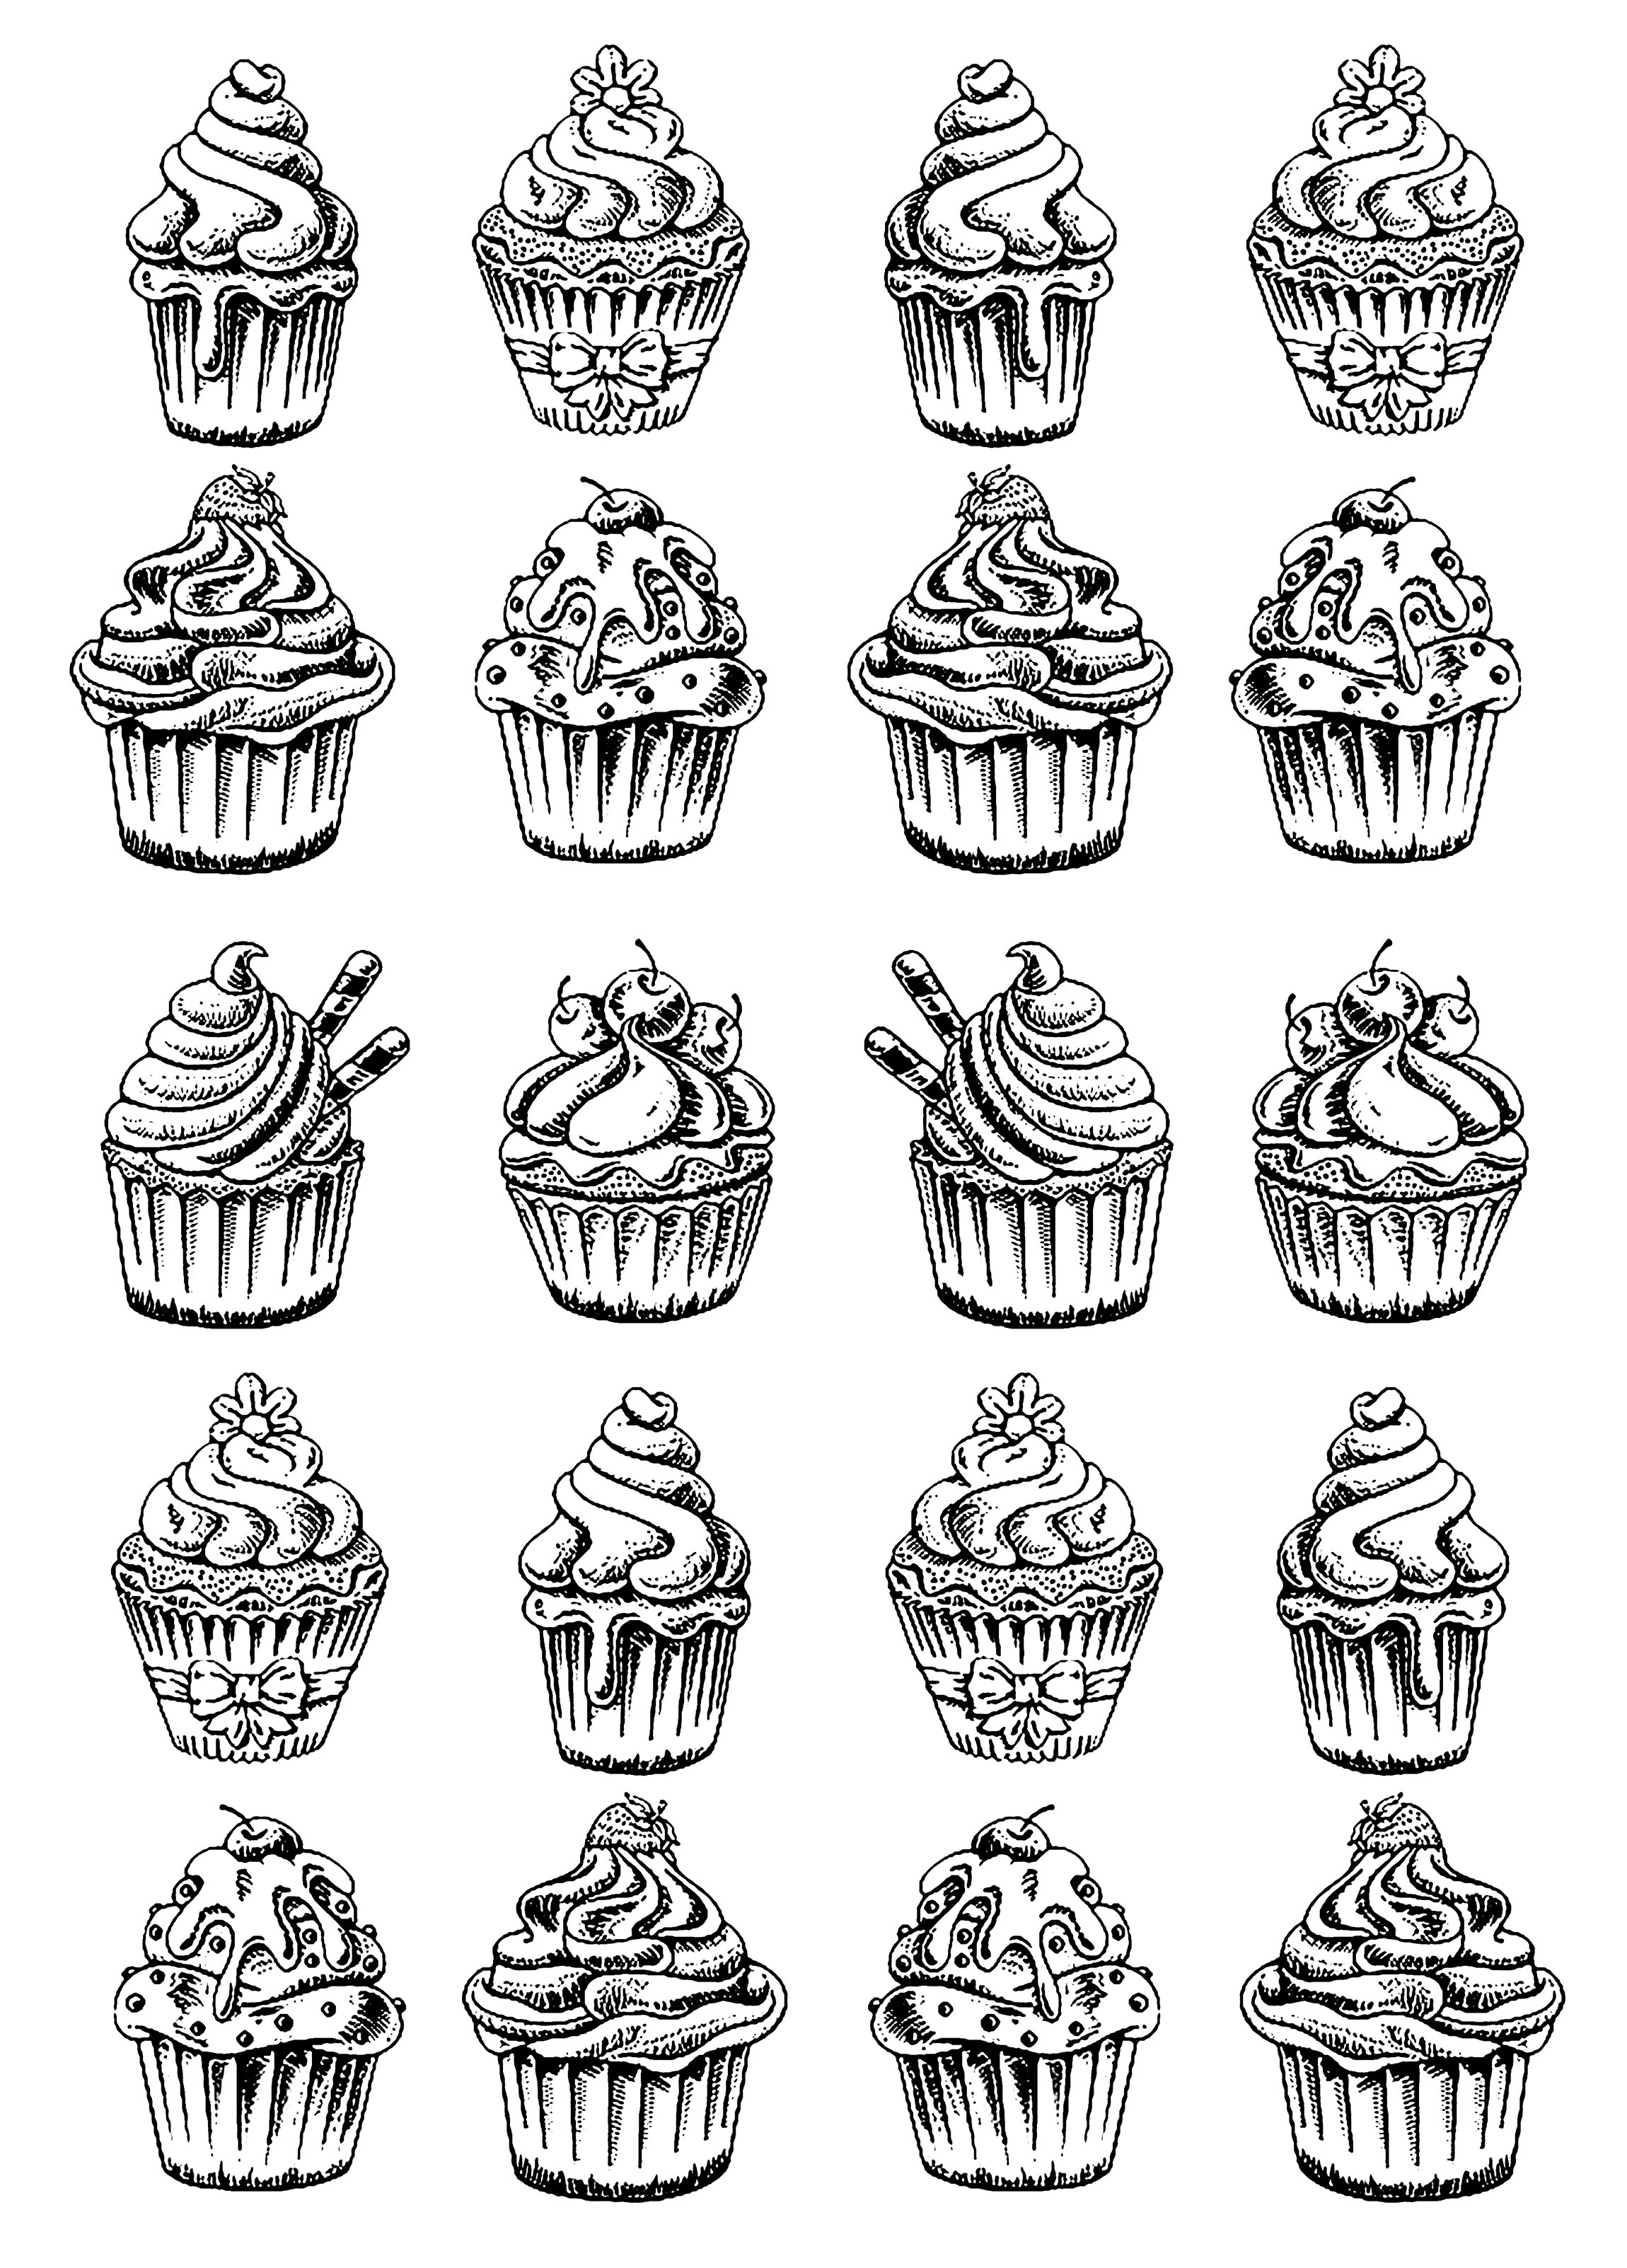 Twenty good Cupcakes to color without waiting